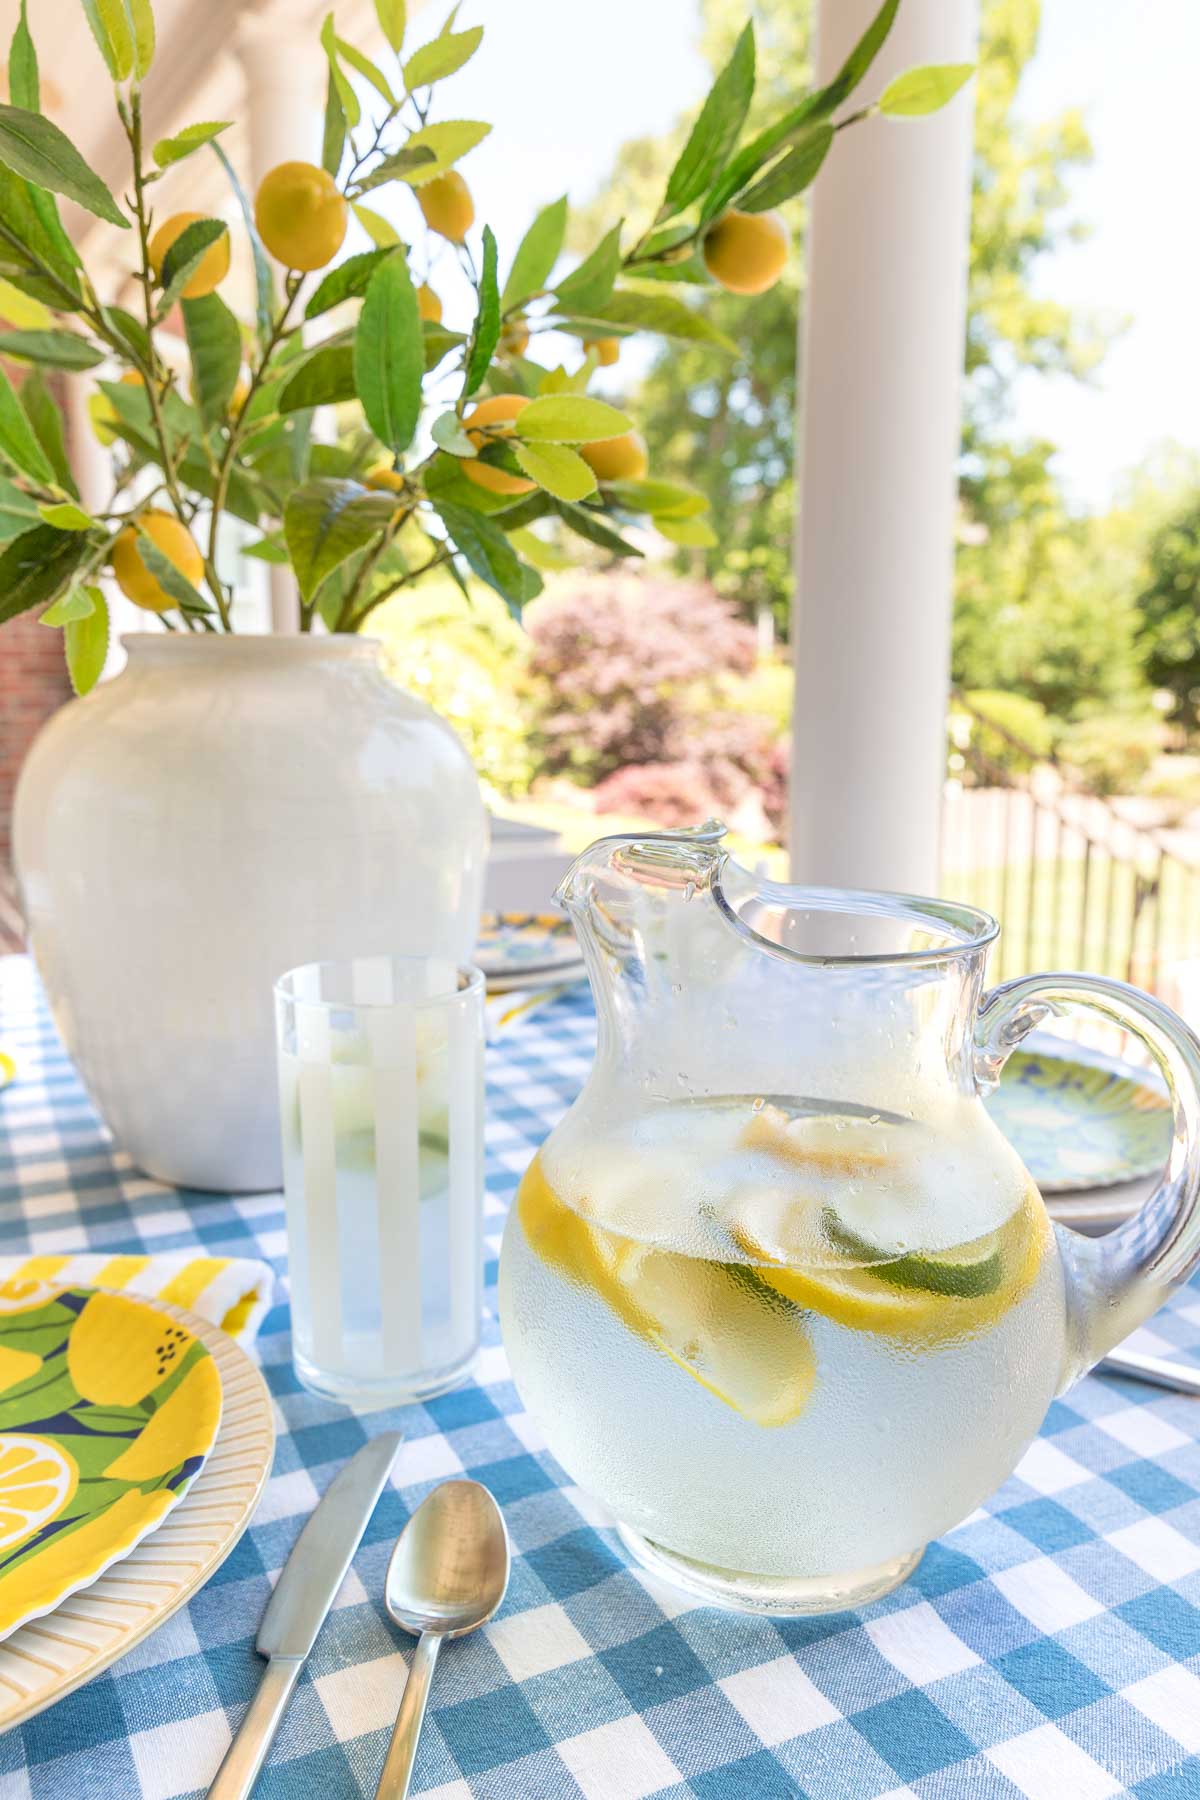 Love this cute pitcher and the striped glasses!